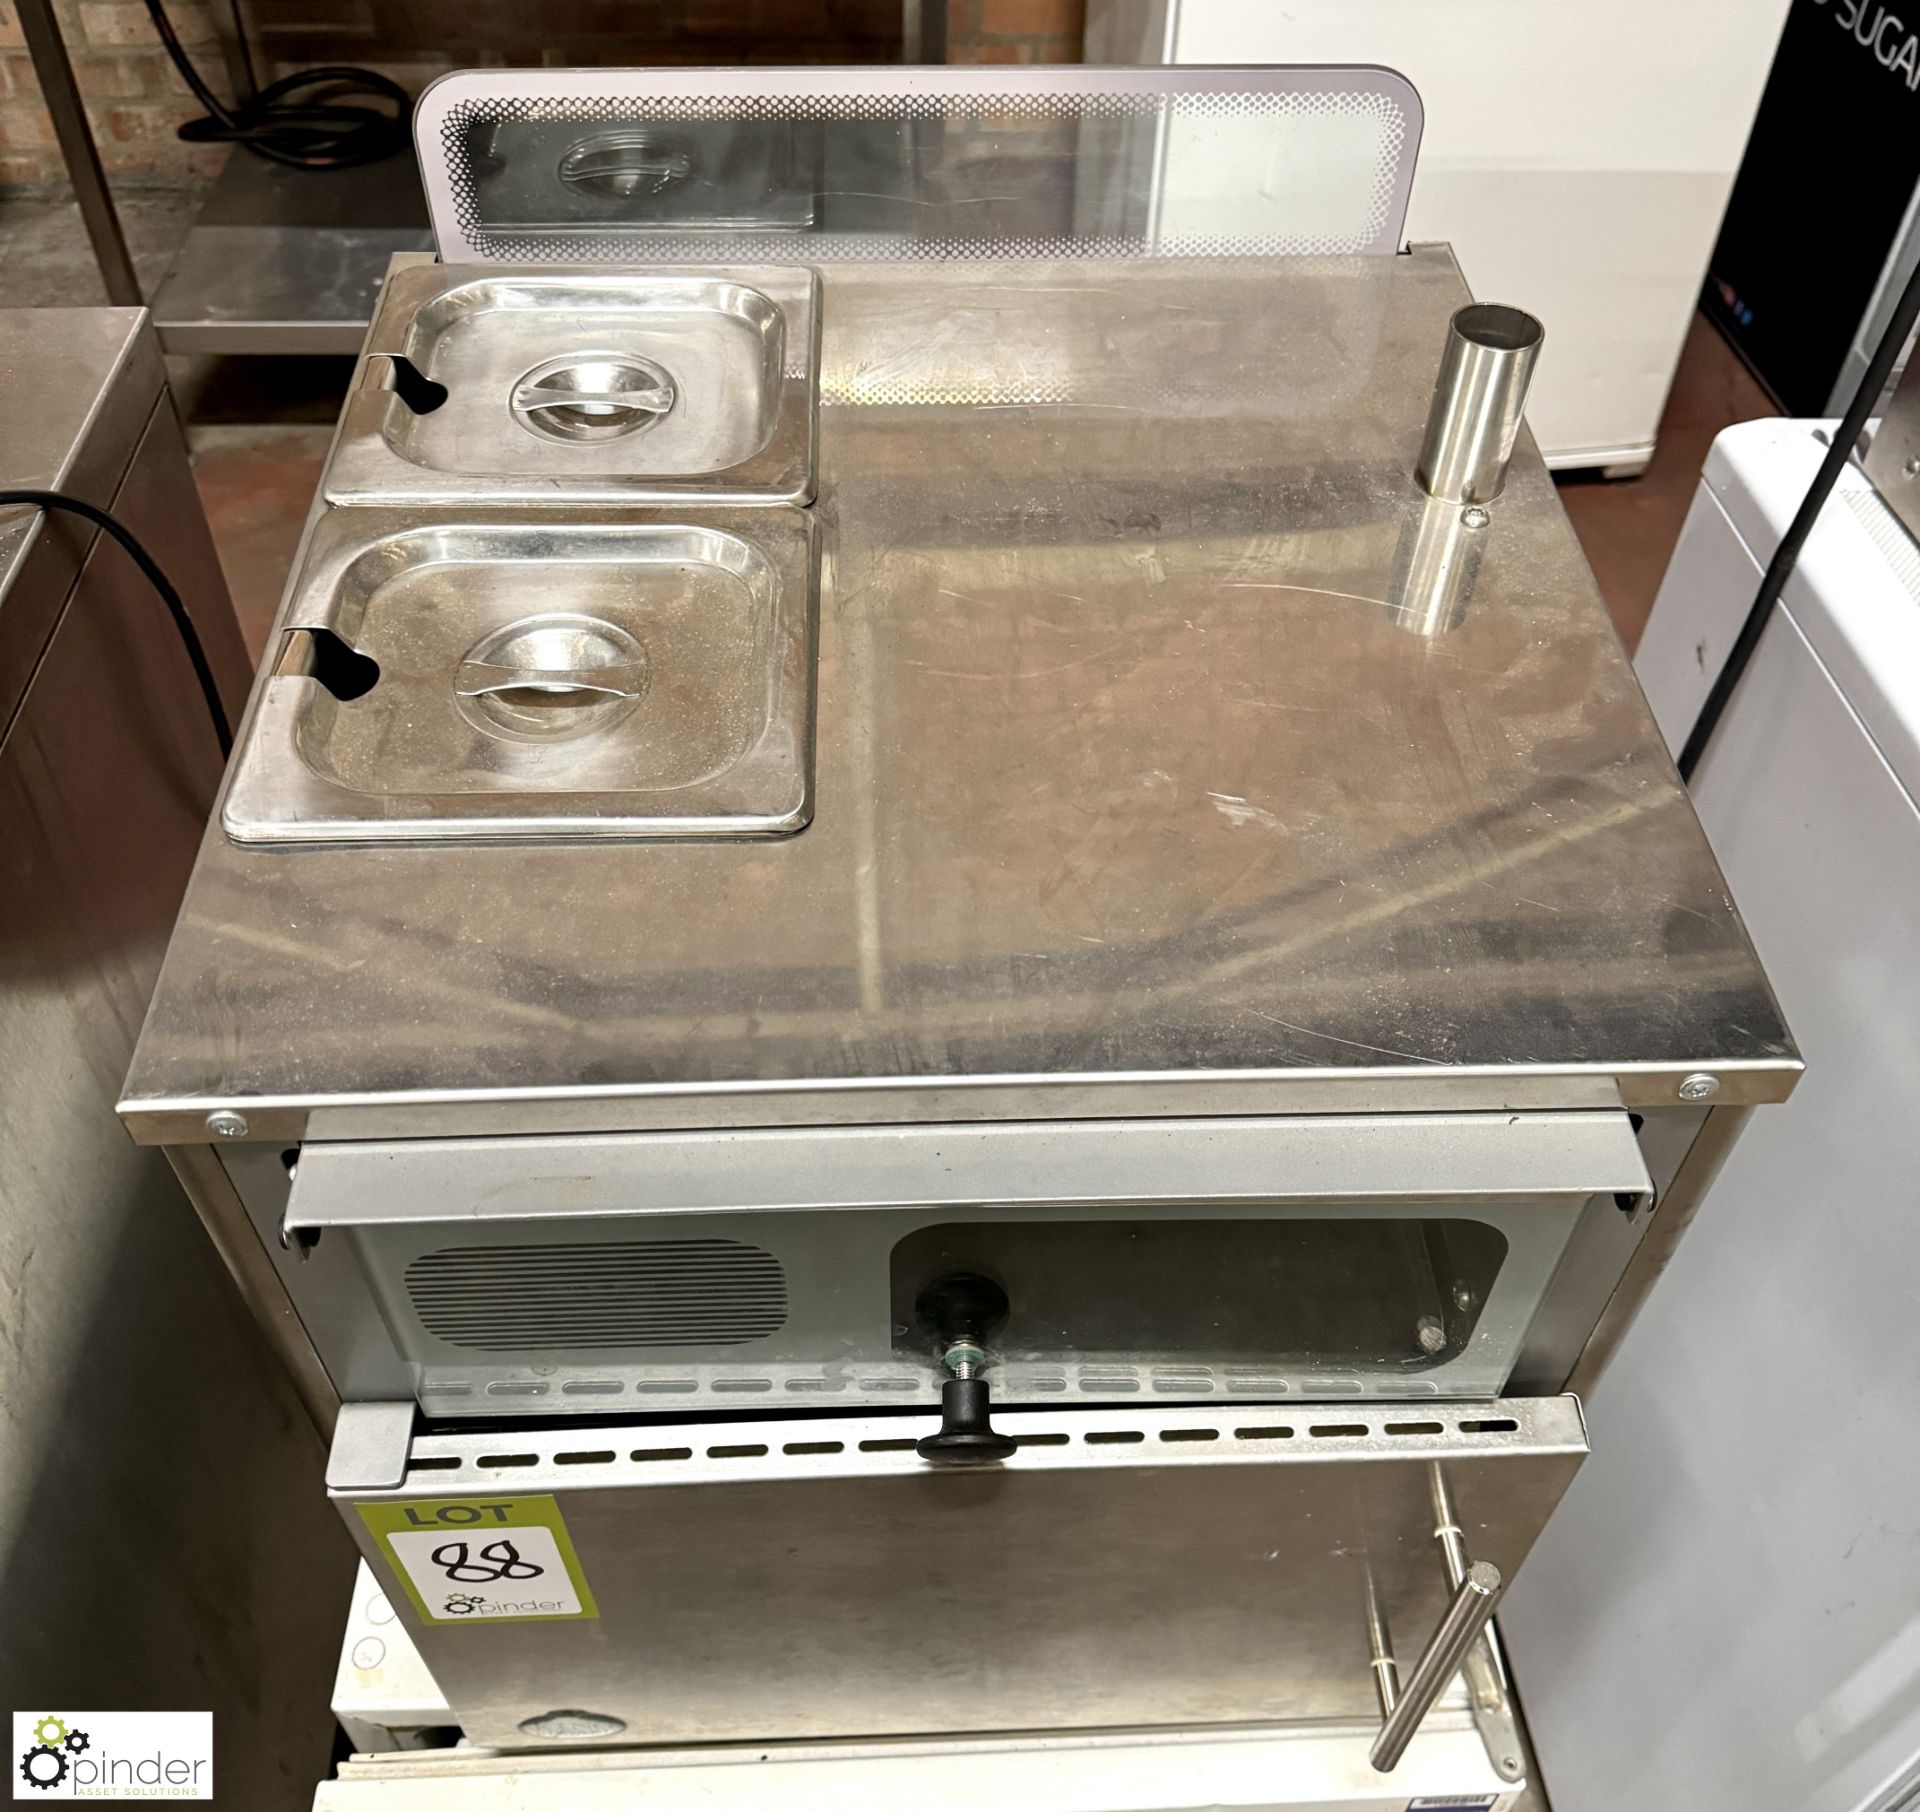 King Edward Baked Potato Oven, with 2 pan bain marie, 240volts - Image 2 of 6